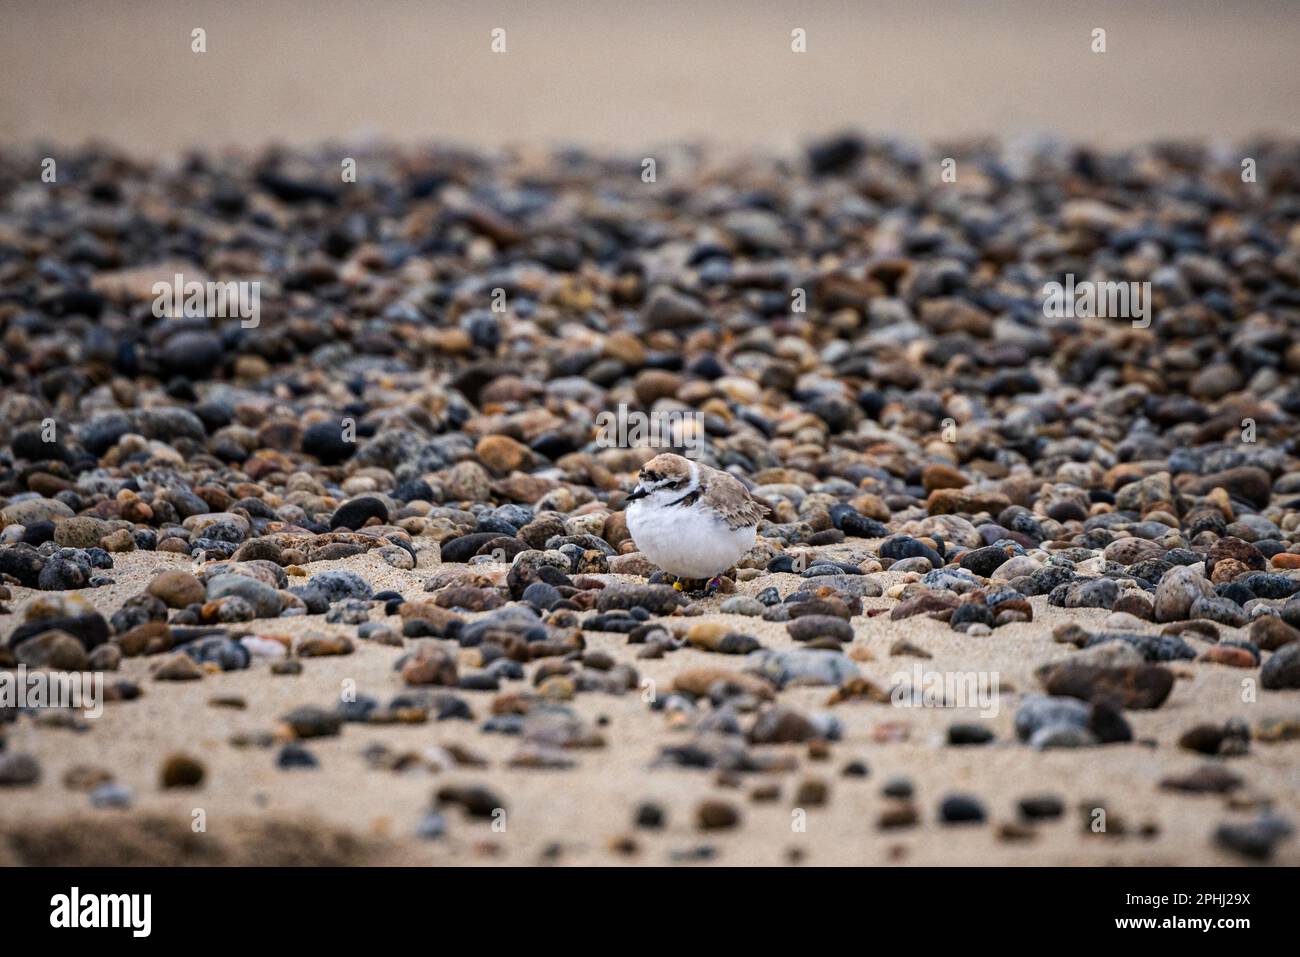 A Western Snowy Plover, Charadrius nivosus with leg bands at Carmel River beach in California Stock Photo